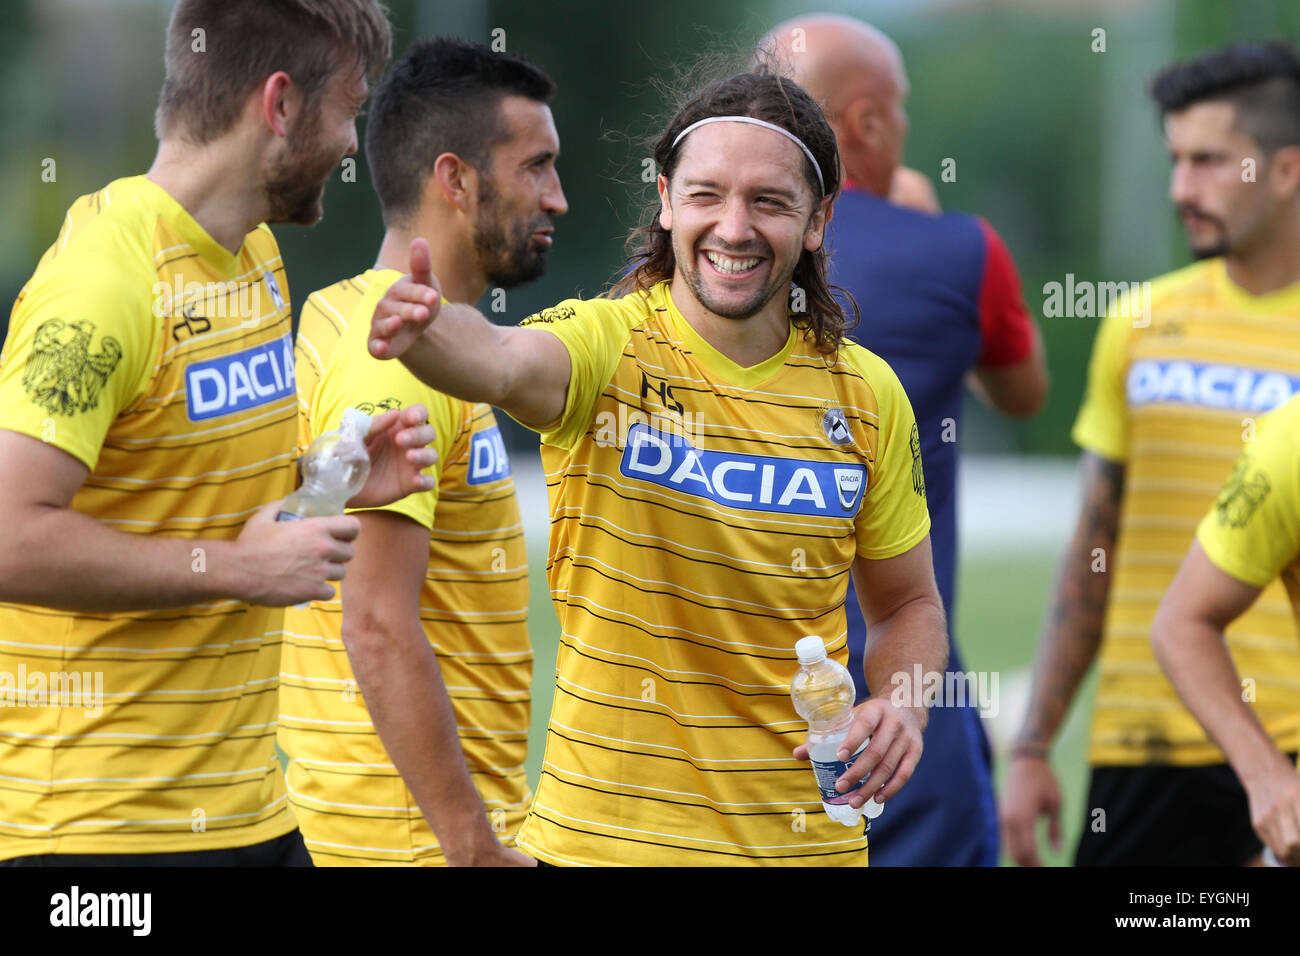 Udine, Italy. 29th July, 2015. Udinese's midfielder Manuel Iturrasmiles with Udinese's defender Neuton Sergio Piccoli during the friendly pre-season football match Udinese Calcio v Clodiense on 29th July, 2015 at Bruseschi training center in Udine, Italy. Credit:  Andrea Spinelli/Alamy Live News Stock Photo